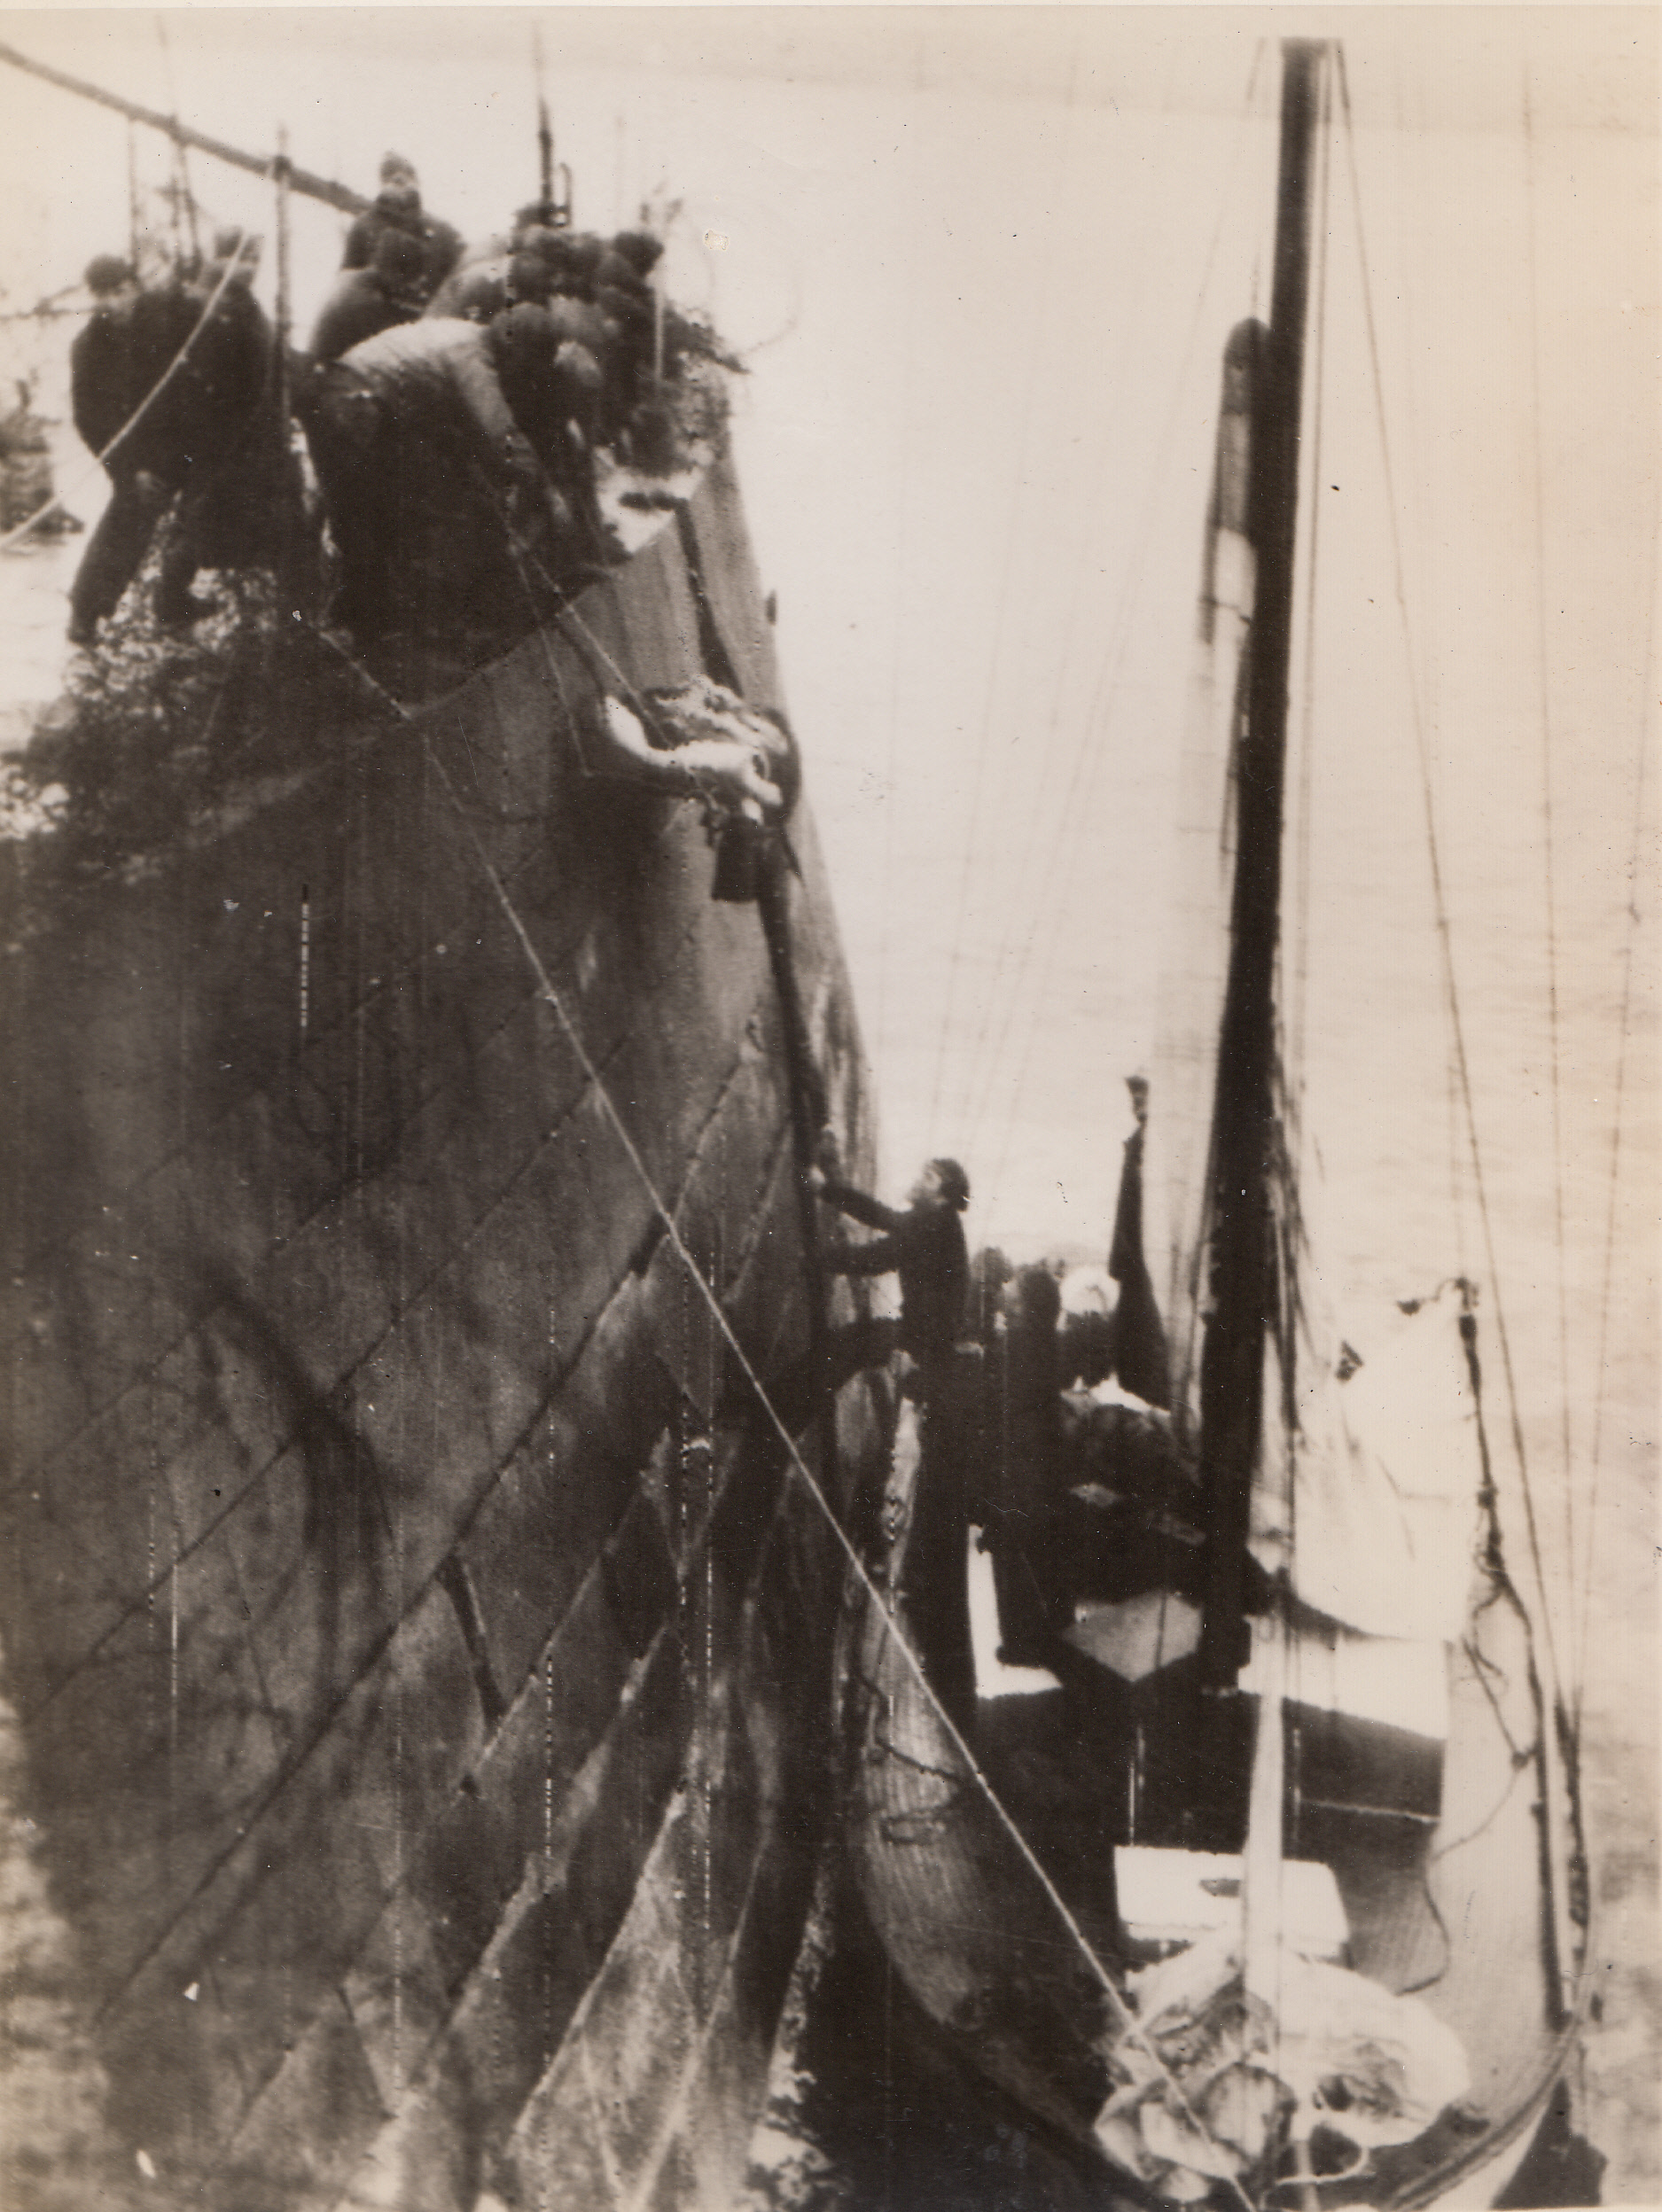 He Guarded The Harbor, 7/3/1944. Cherbourg, France – A sailor stands in the sailboat waiting to receive the stretcher on which is a wounded German non-com. He is being evacuated from a Cherbourg Harbor fort, where he was stationed at the time the American forces invaded the port city.;